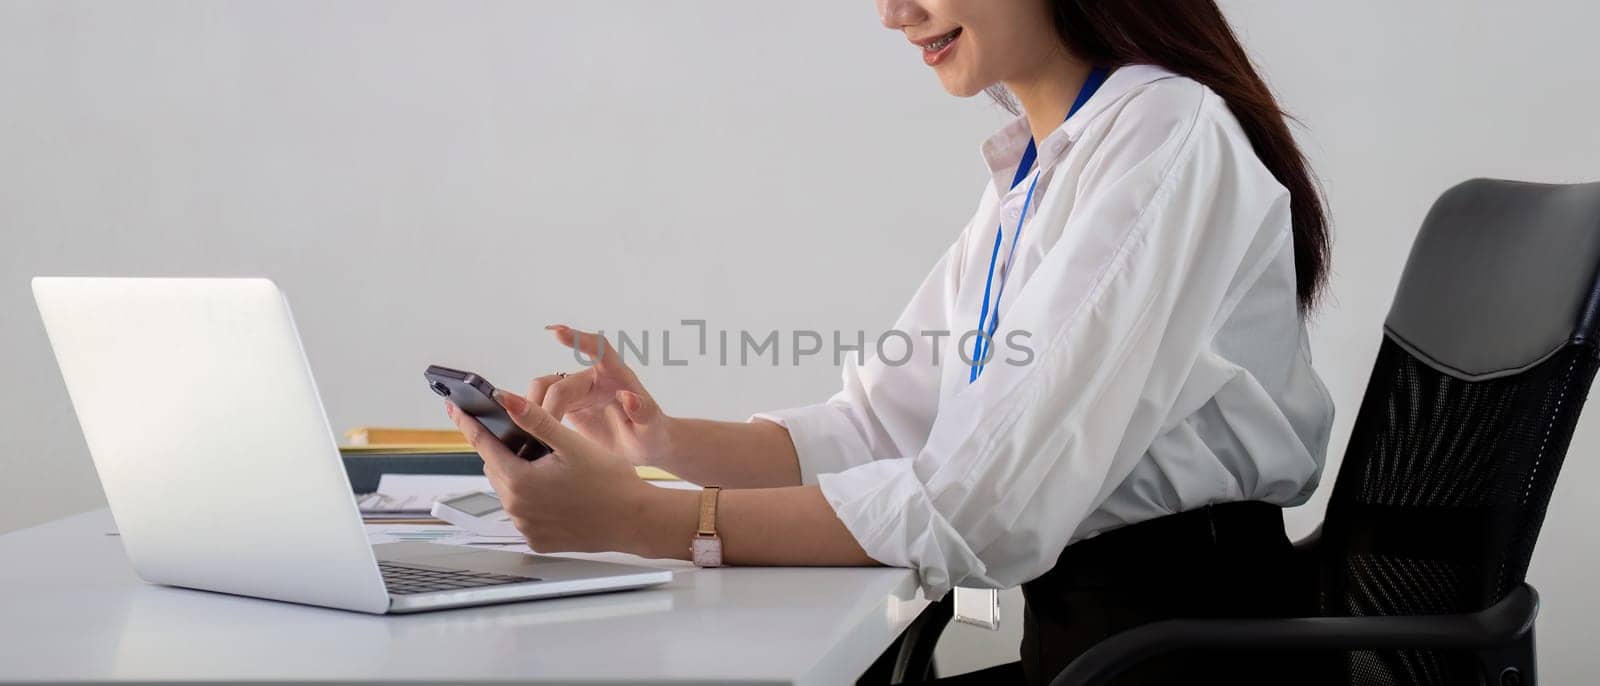 Asian Businesswoman Using Smartphone and Laptop in Office by nateemee